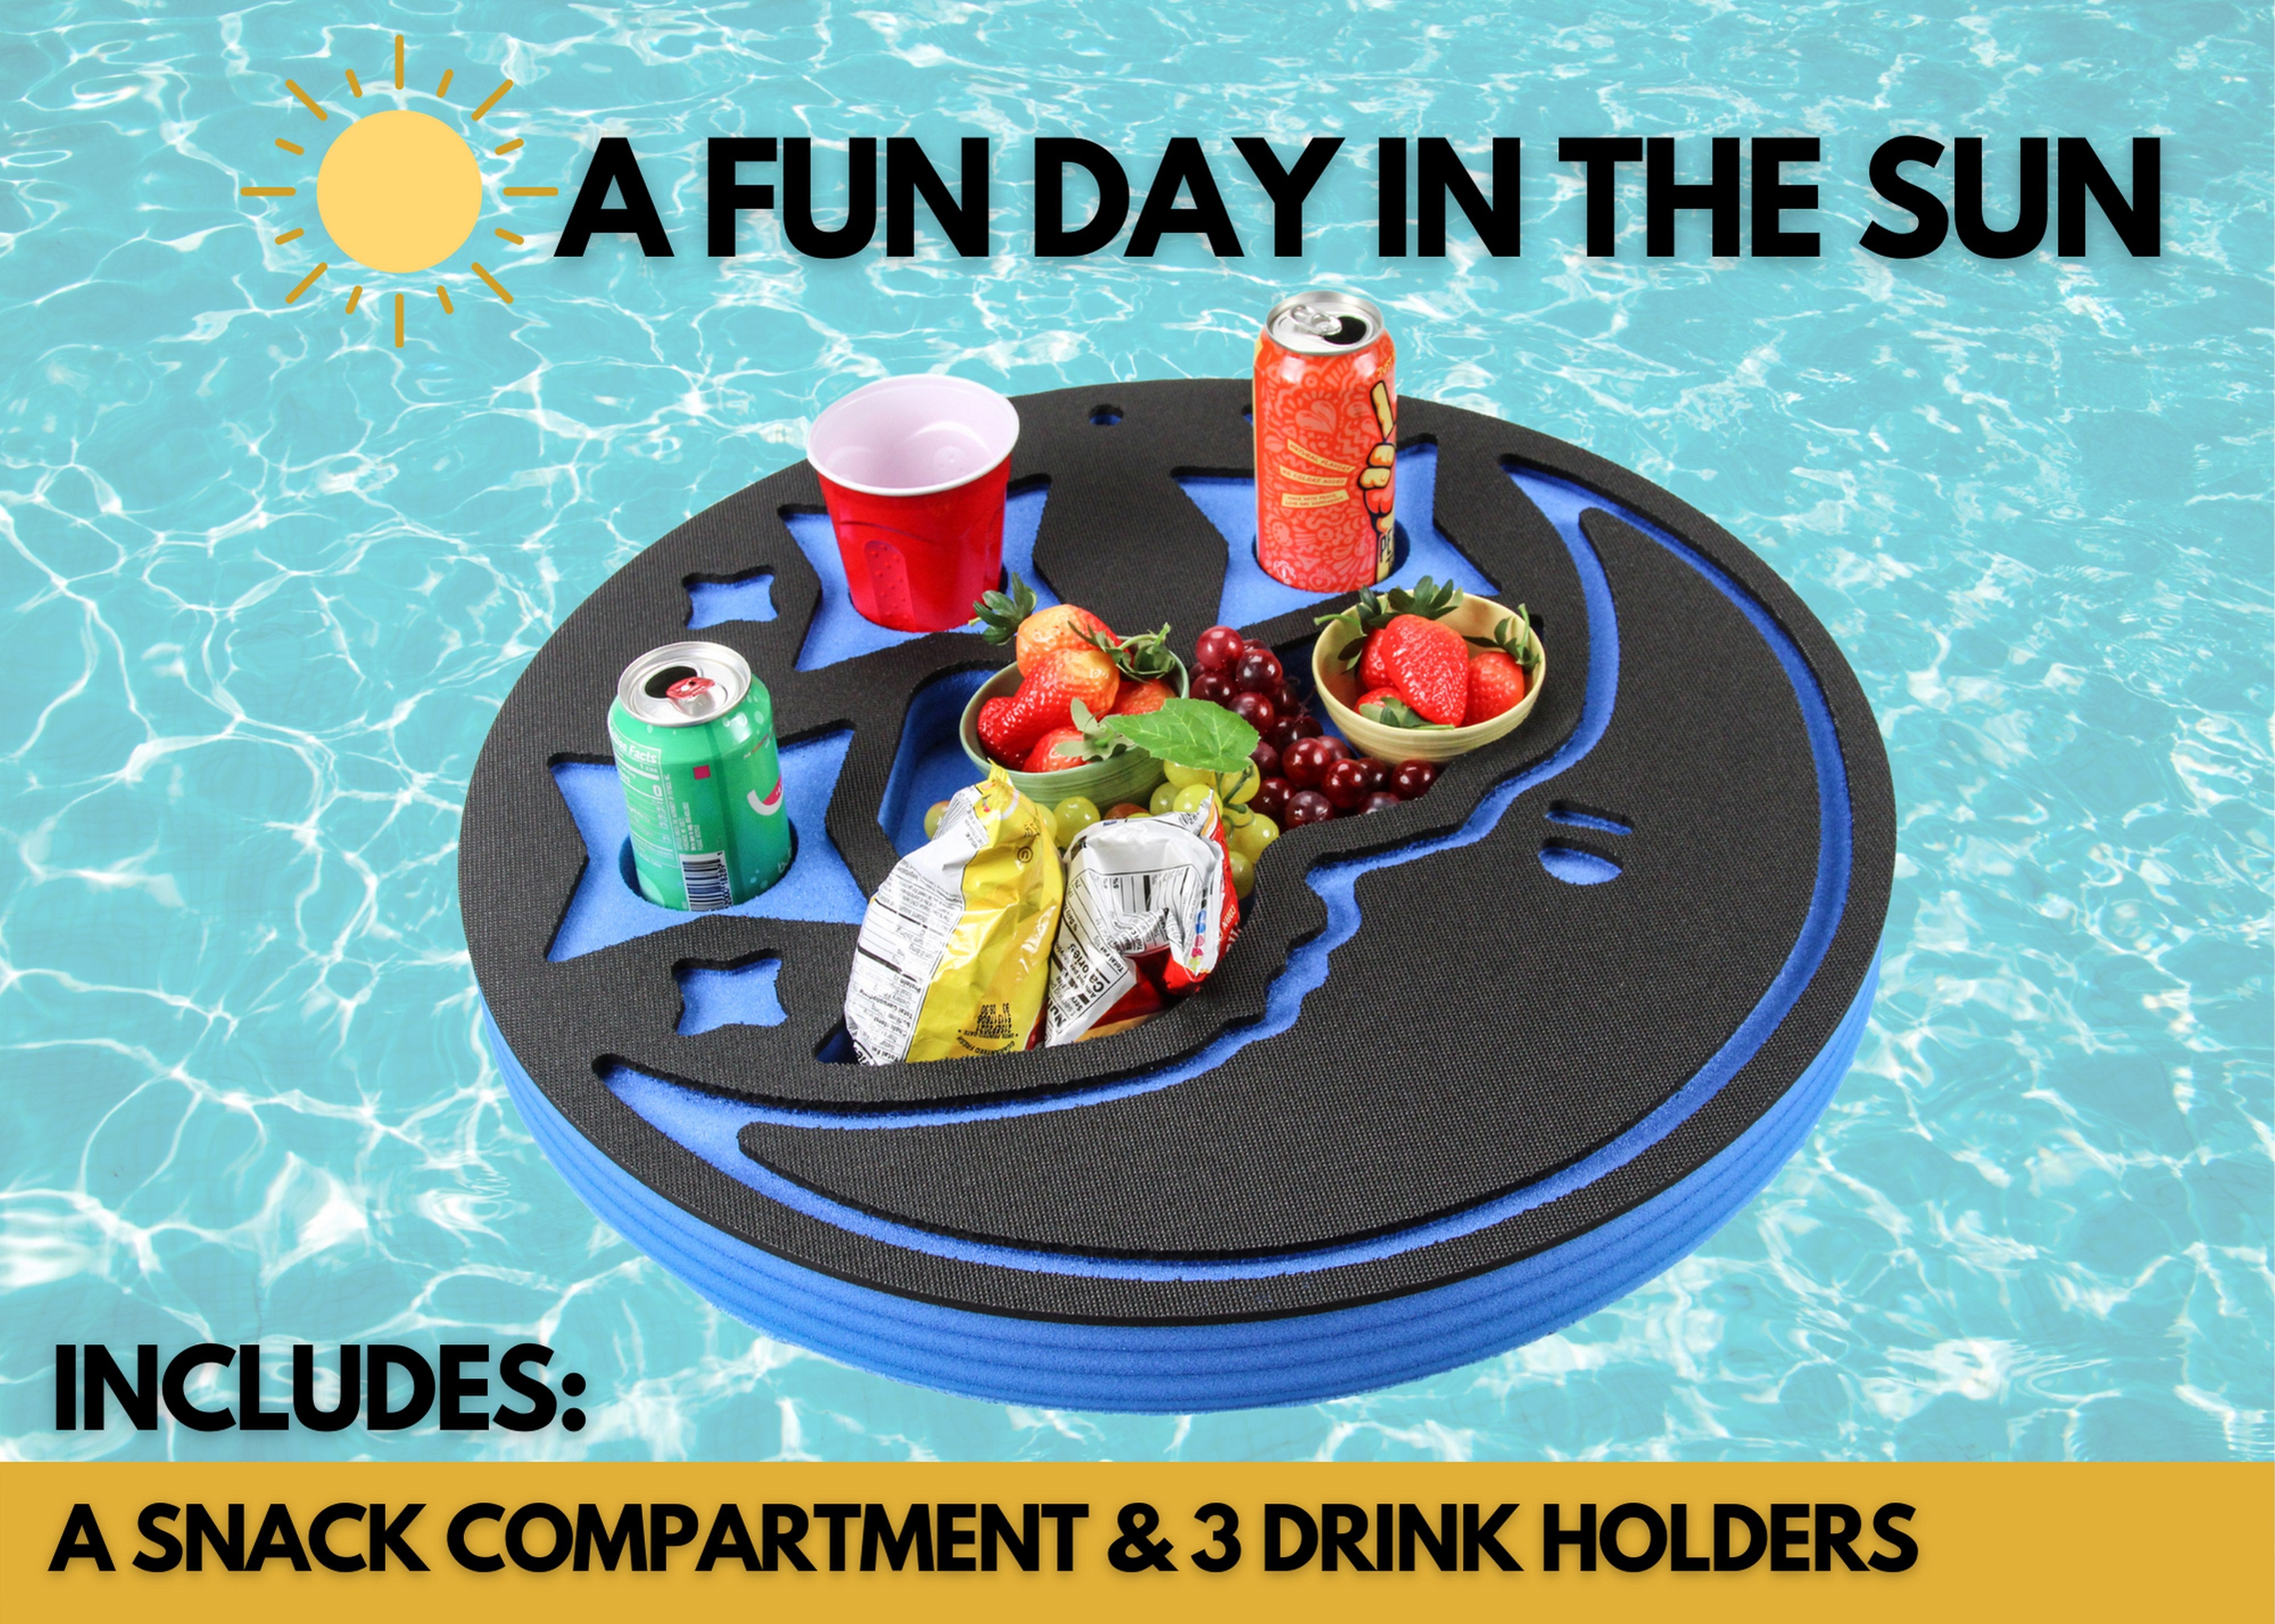 Moon Shaped Drink Holder Refreshment Table Tray for Pool or Beach Party Float Lounge Durable Foam 4 Compartment UV Resistant Cup Holders 2 Feet